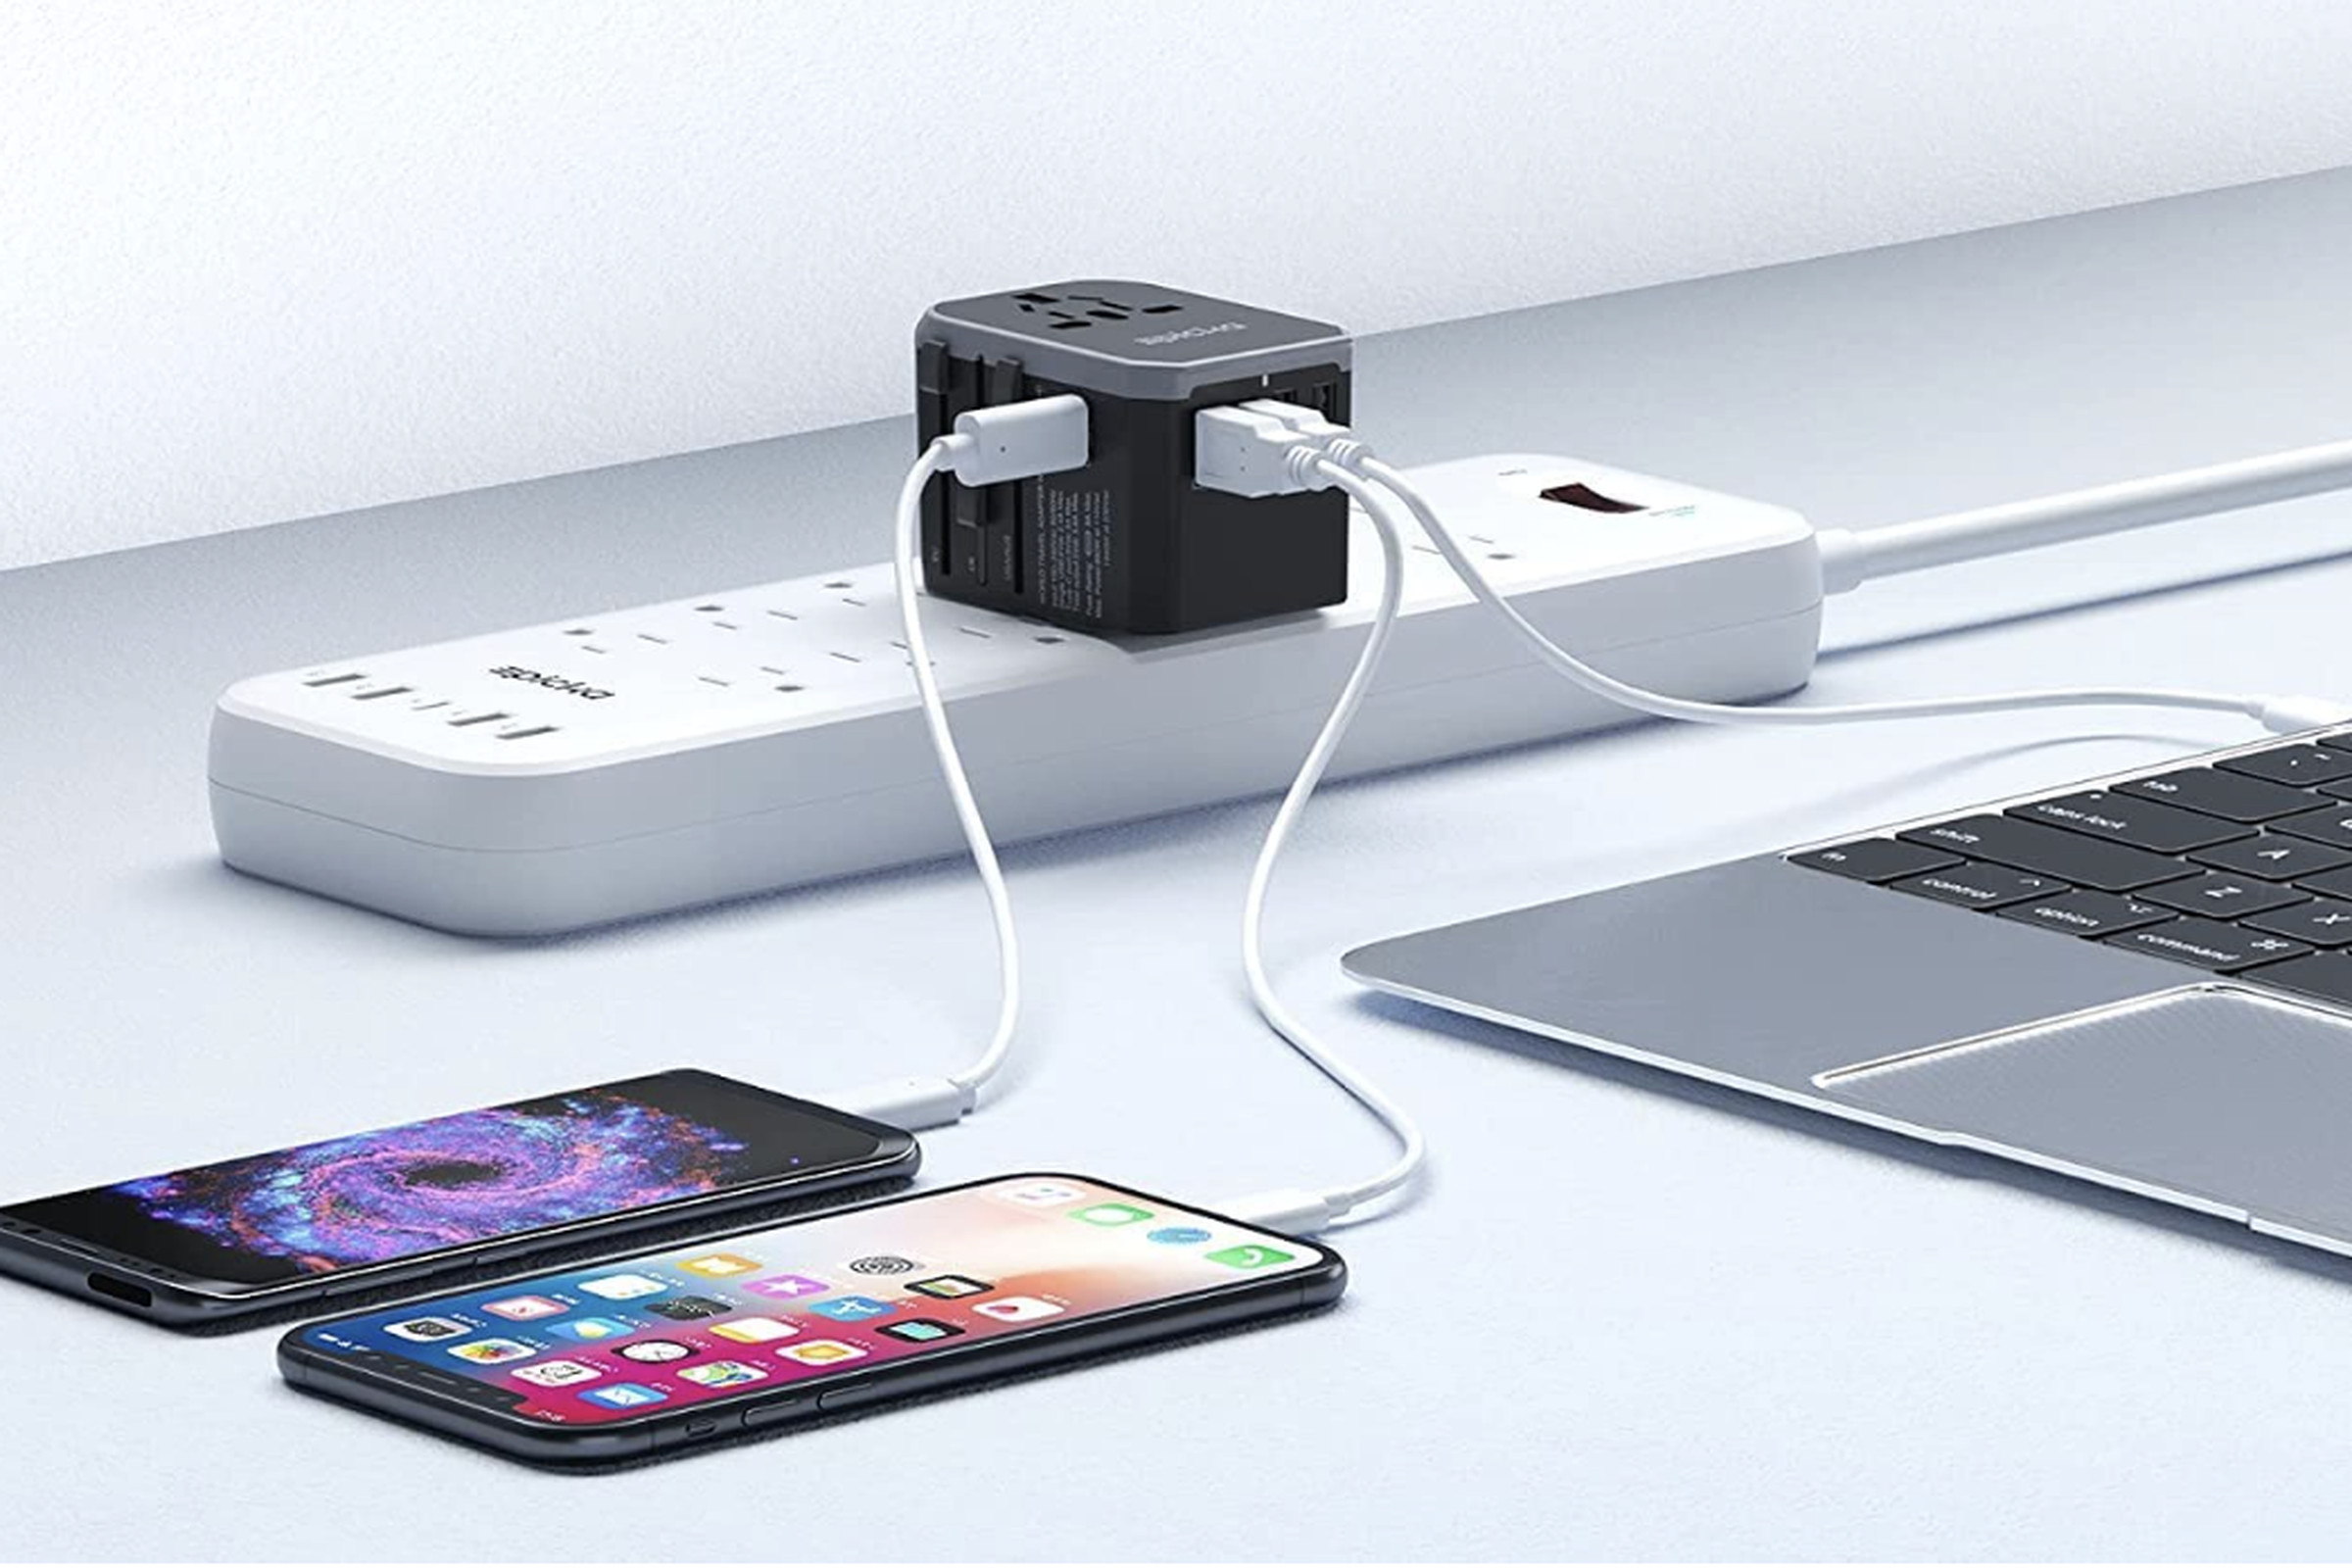 Travel adaptor on power strip connected to phones and laptop.